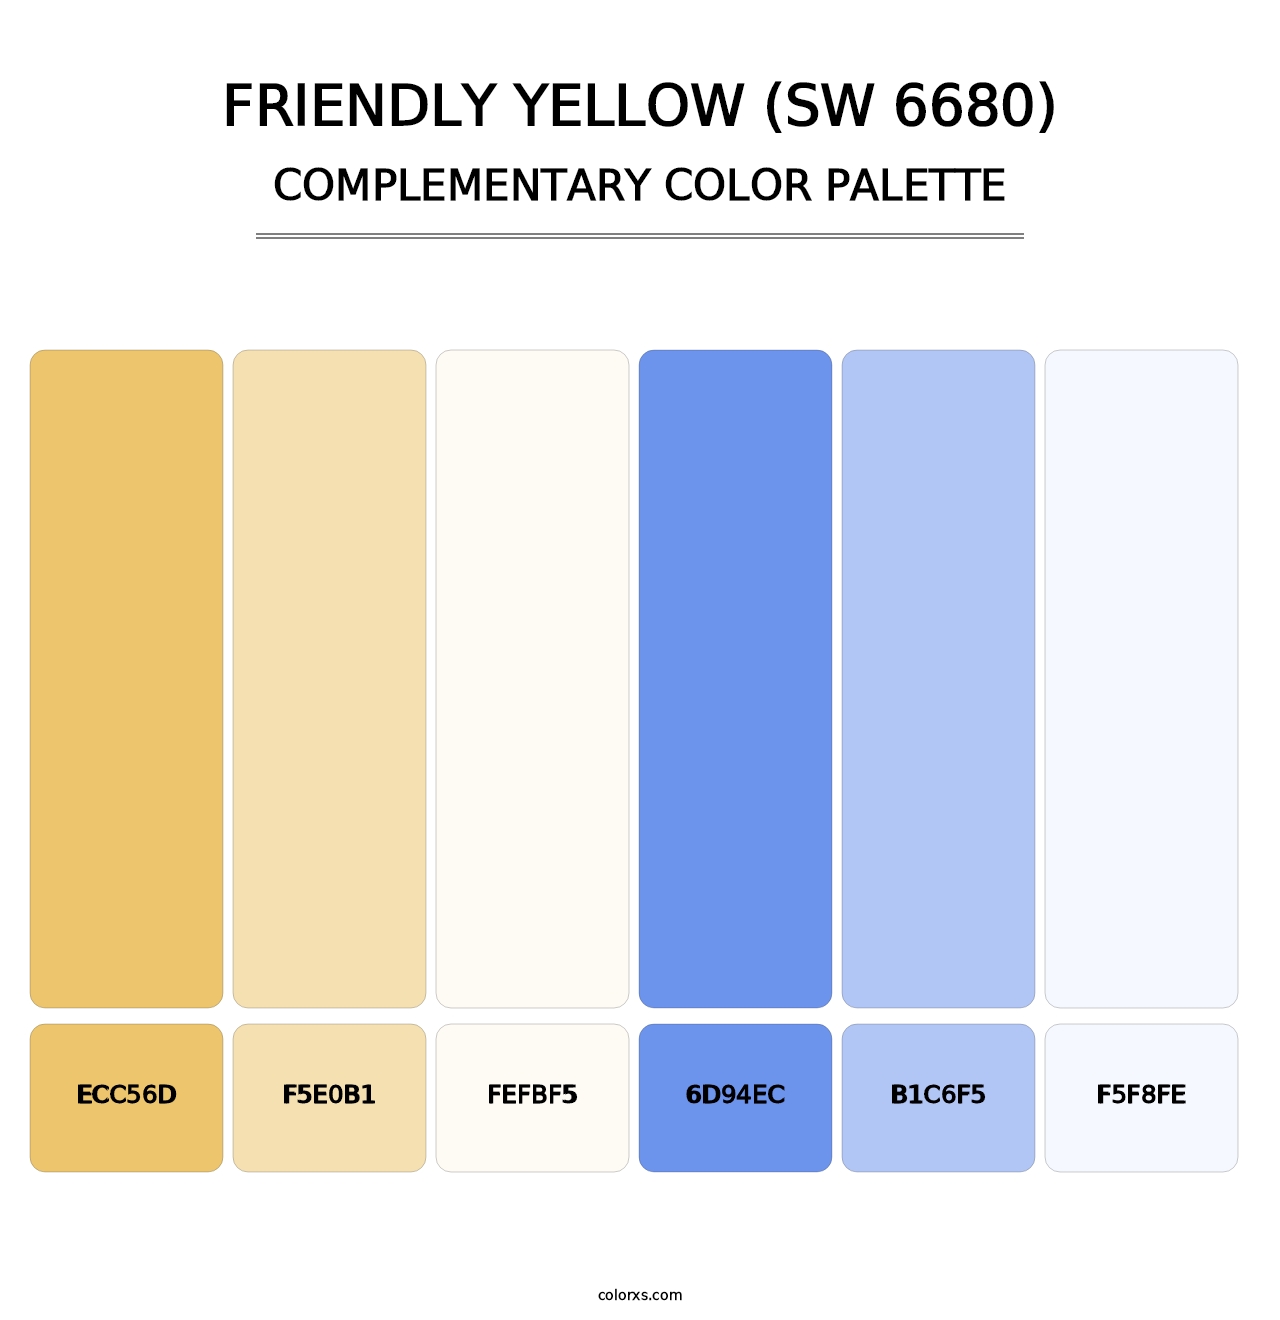 Friendly Yellow (SW 6680) - Complementary Color Palette